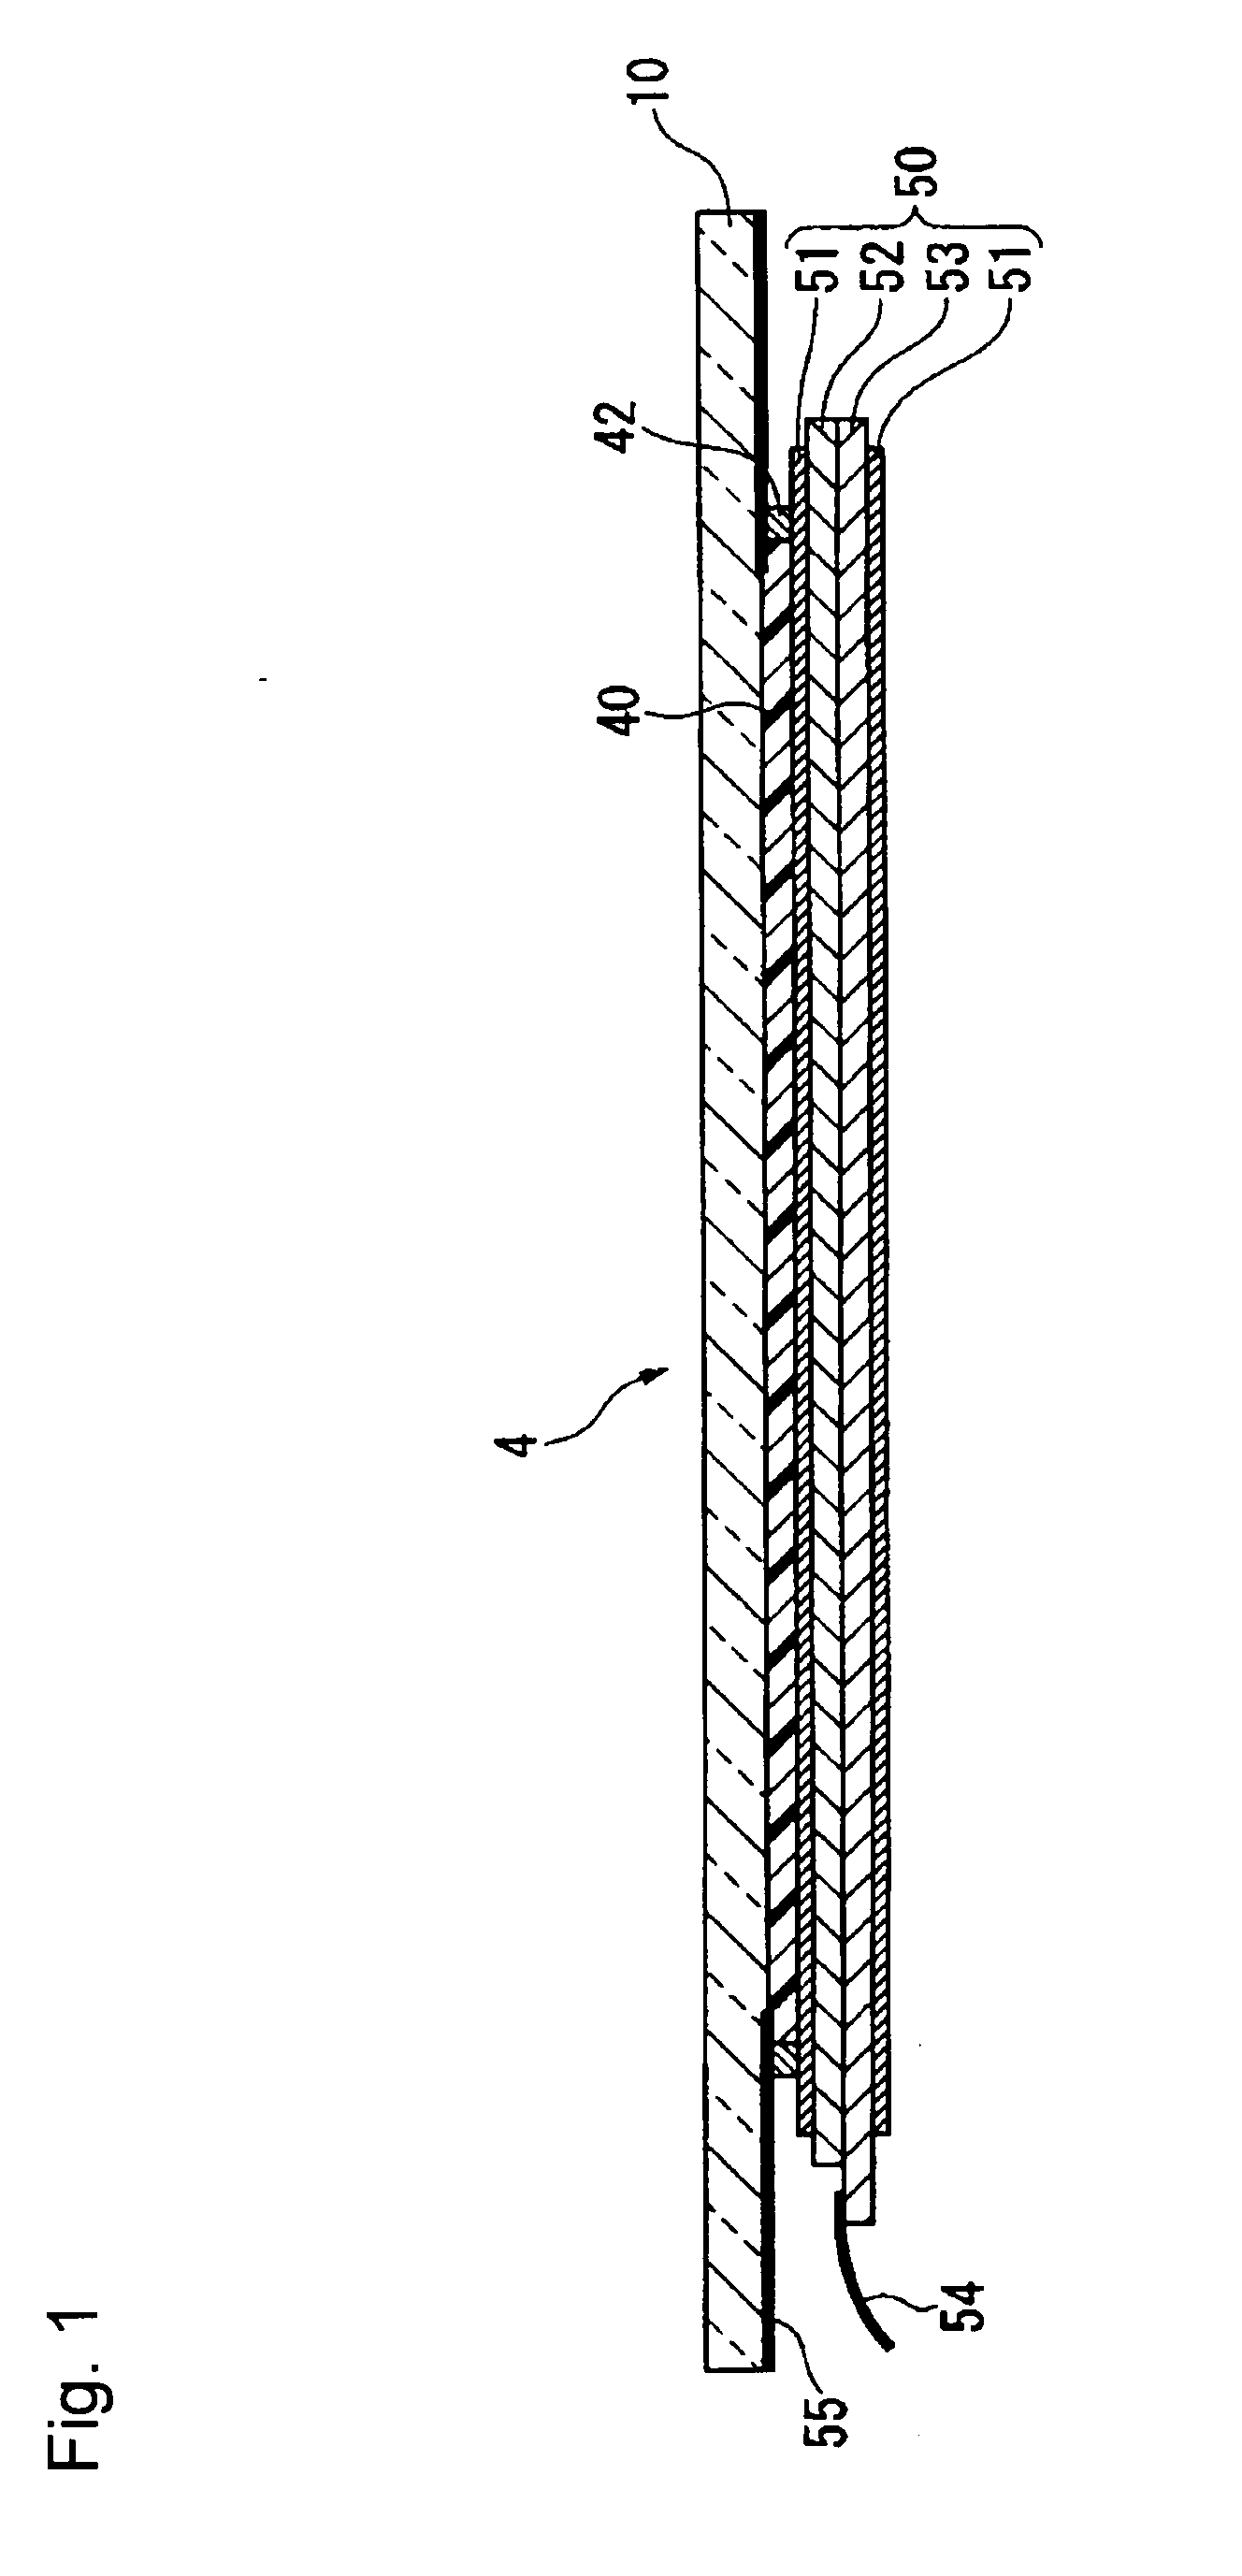 Display apparatus and process for producing the same